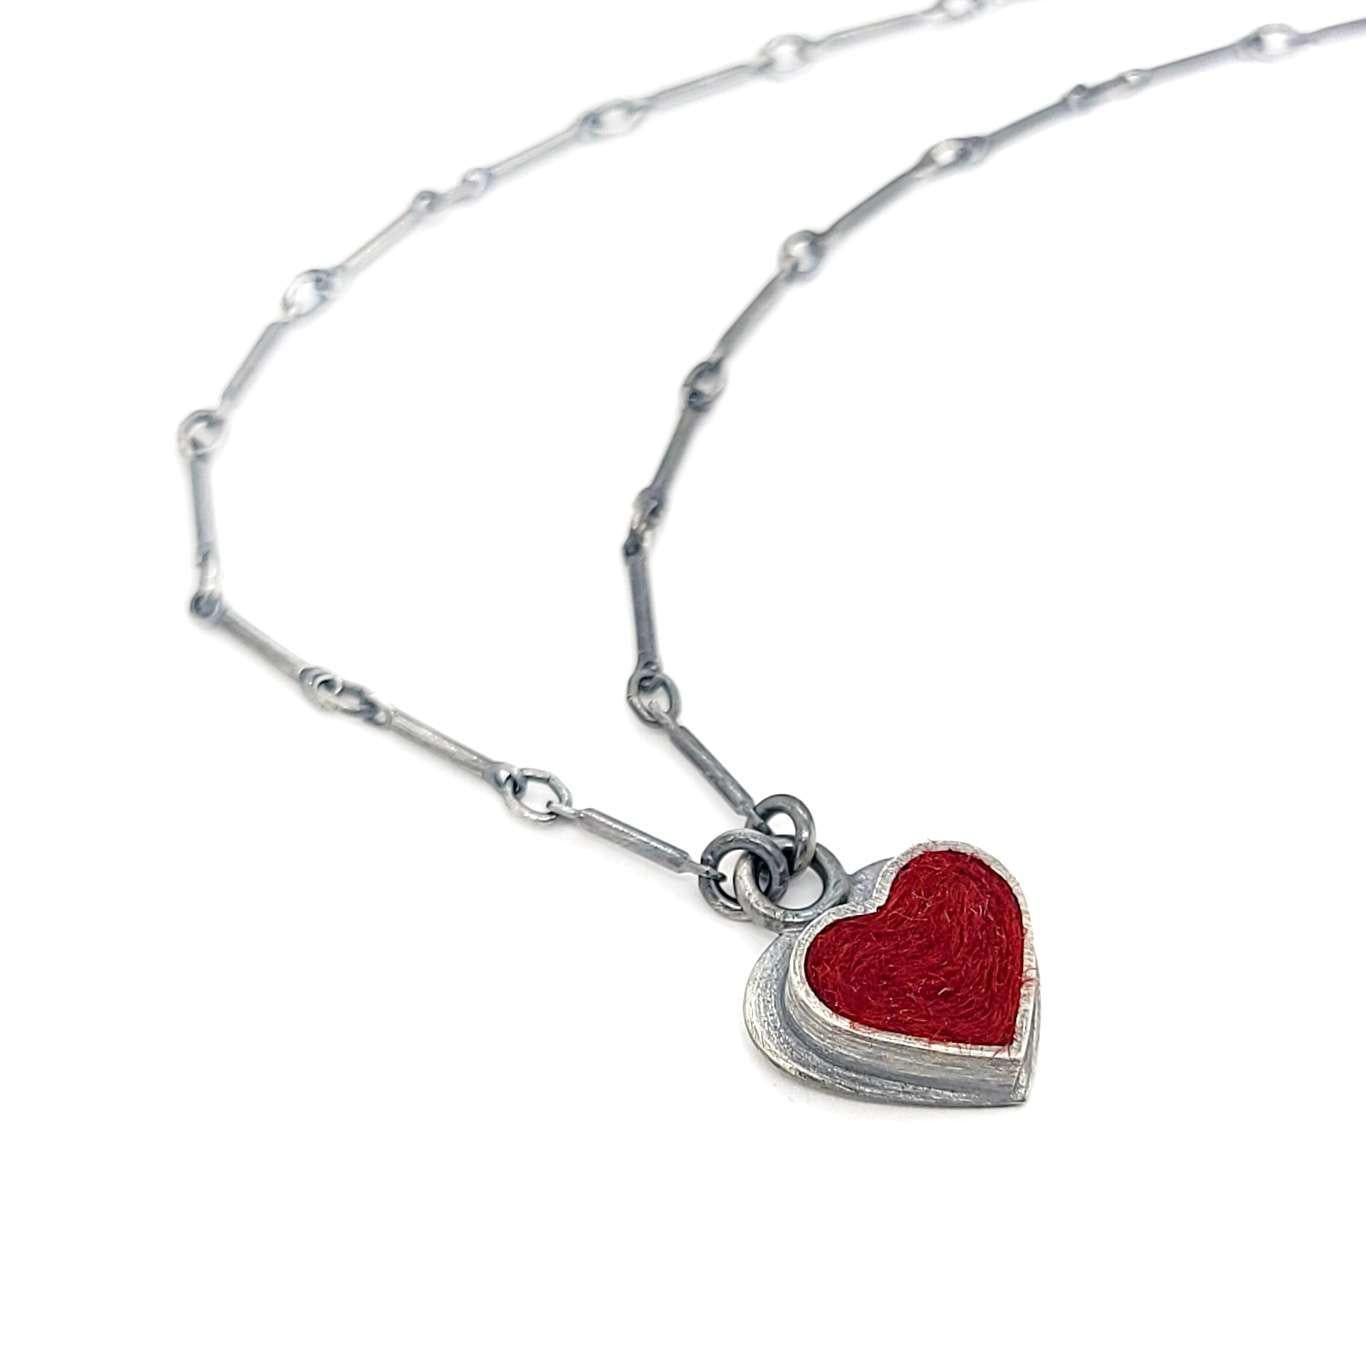 Necklace - Heart in Cranberry Red by Michele A. Friedman